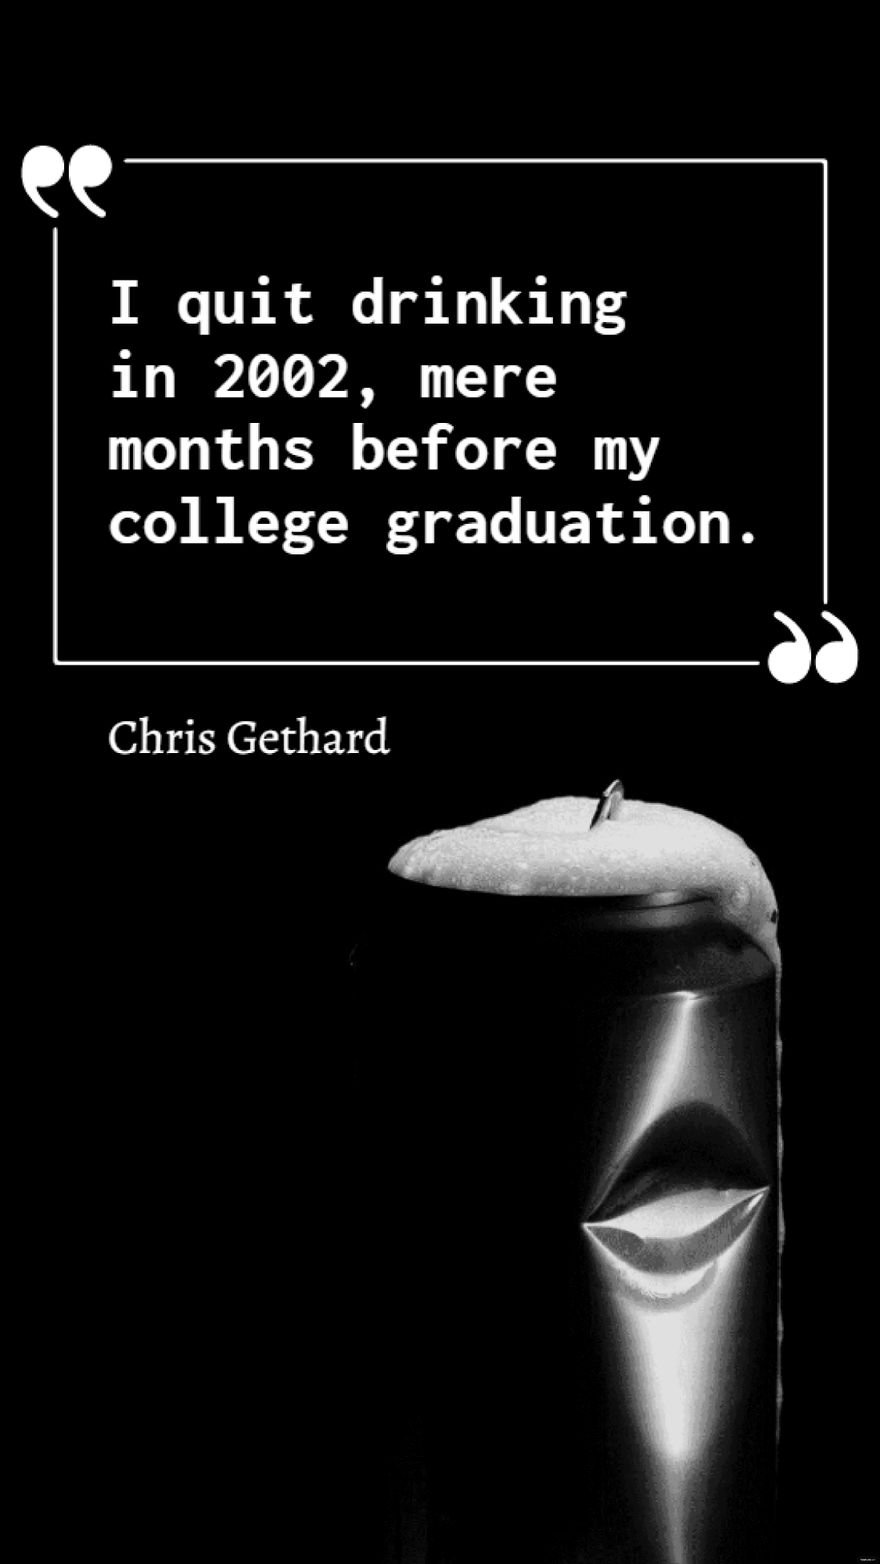 Free Chris Gethard - I quit drinking in 2002, mere months before my college graduation.